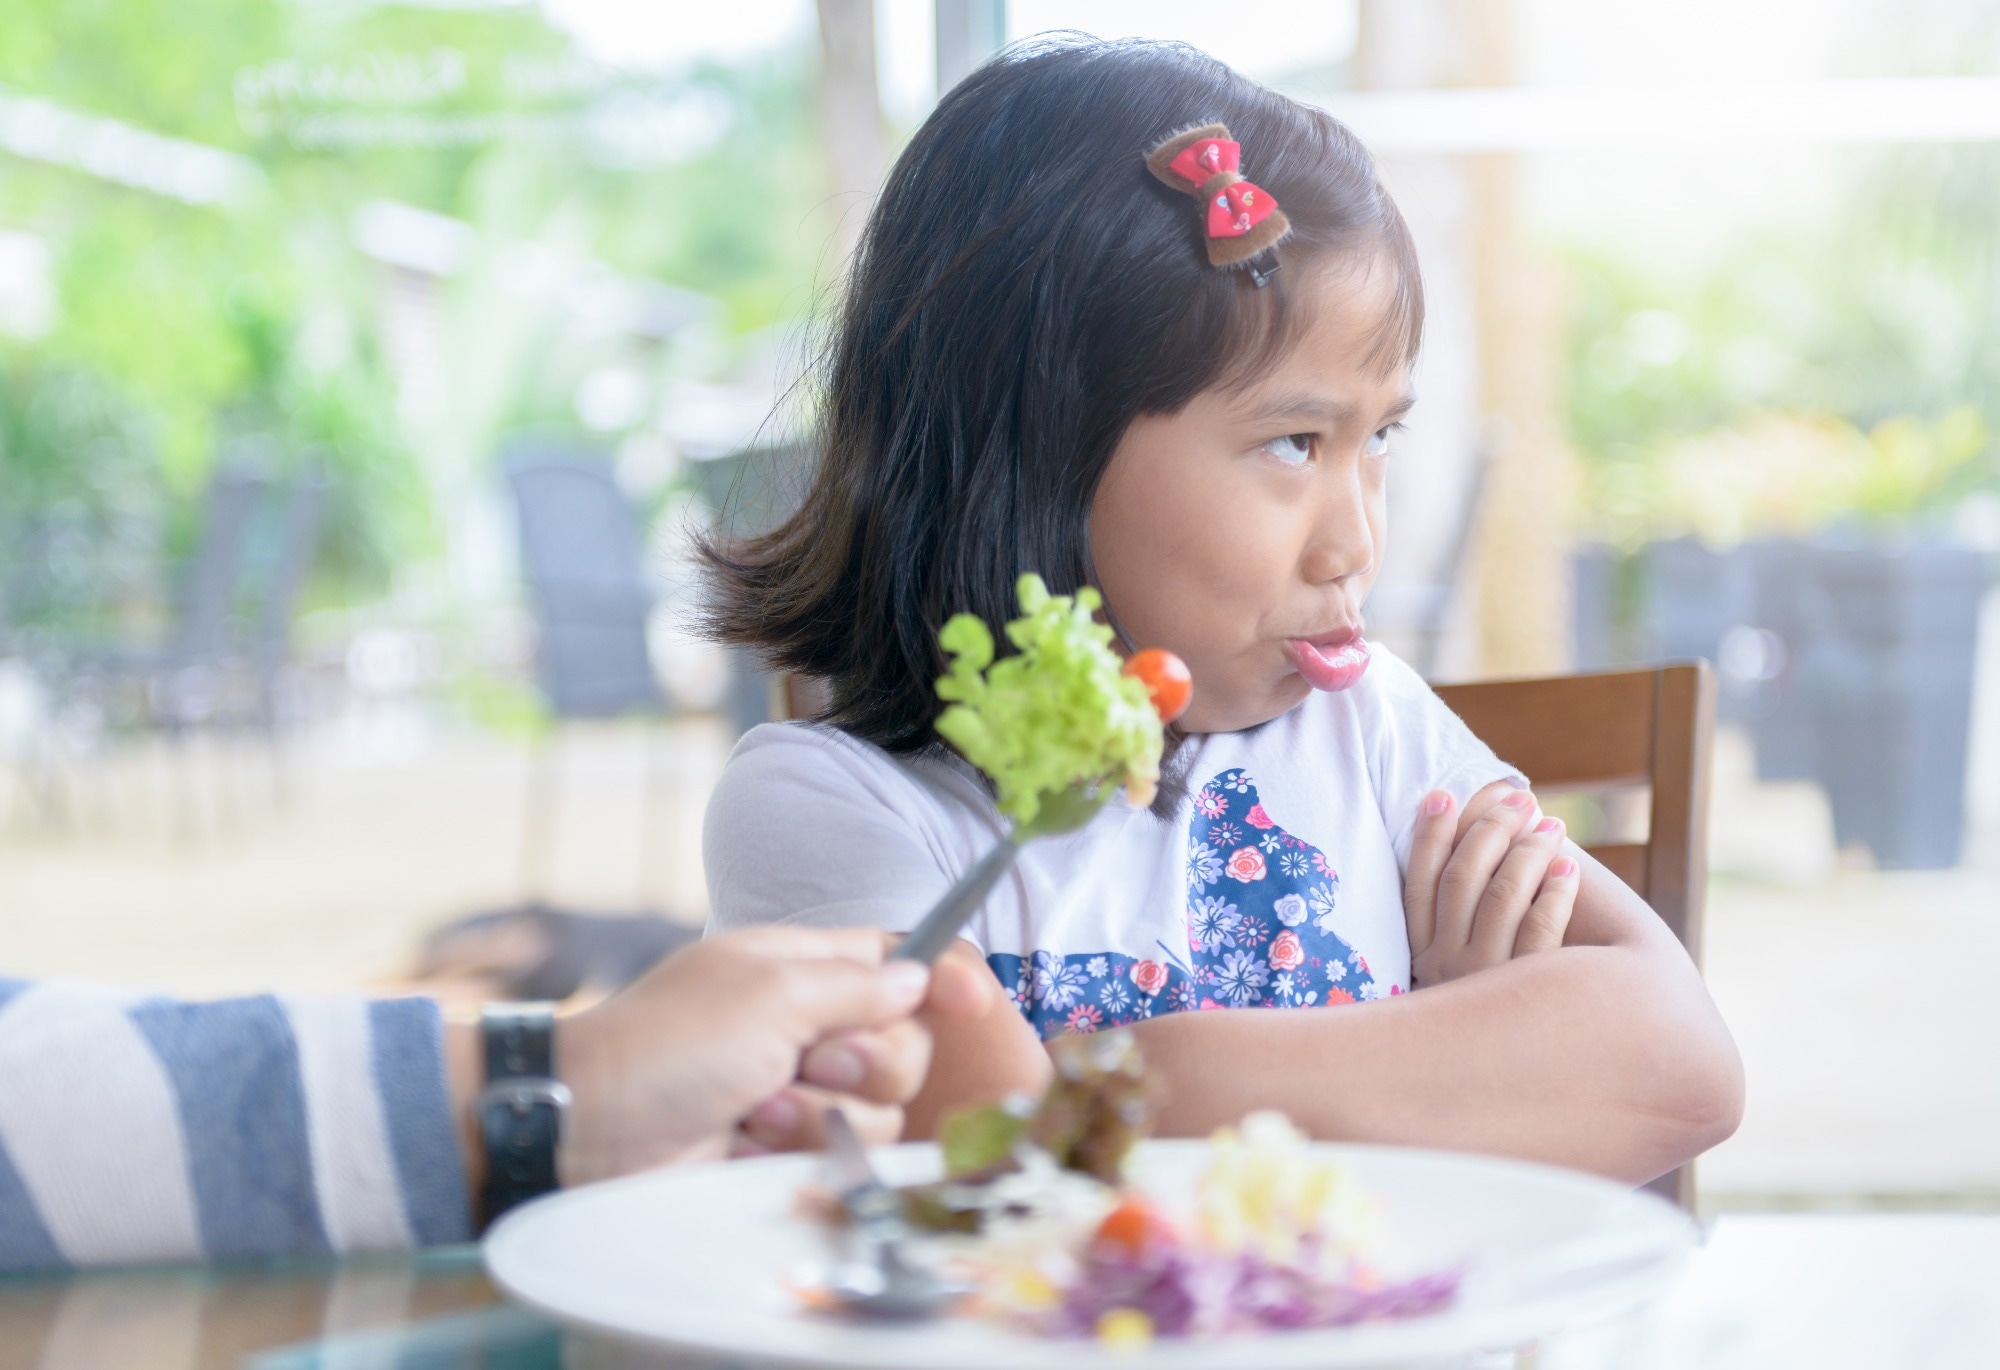 Study: Association of picky eating around age 4 with dietary intake and weight status in early adulthood: A 14-year follow-up based on the KOALA birth cohort study. Image Credit: kwanchai.c / Shutterstock